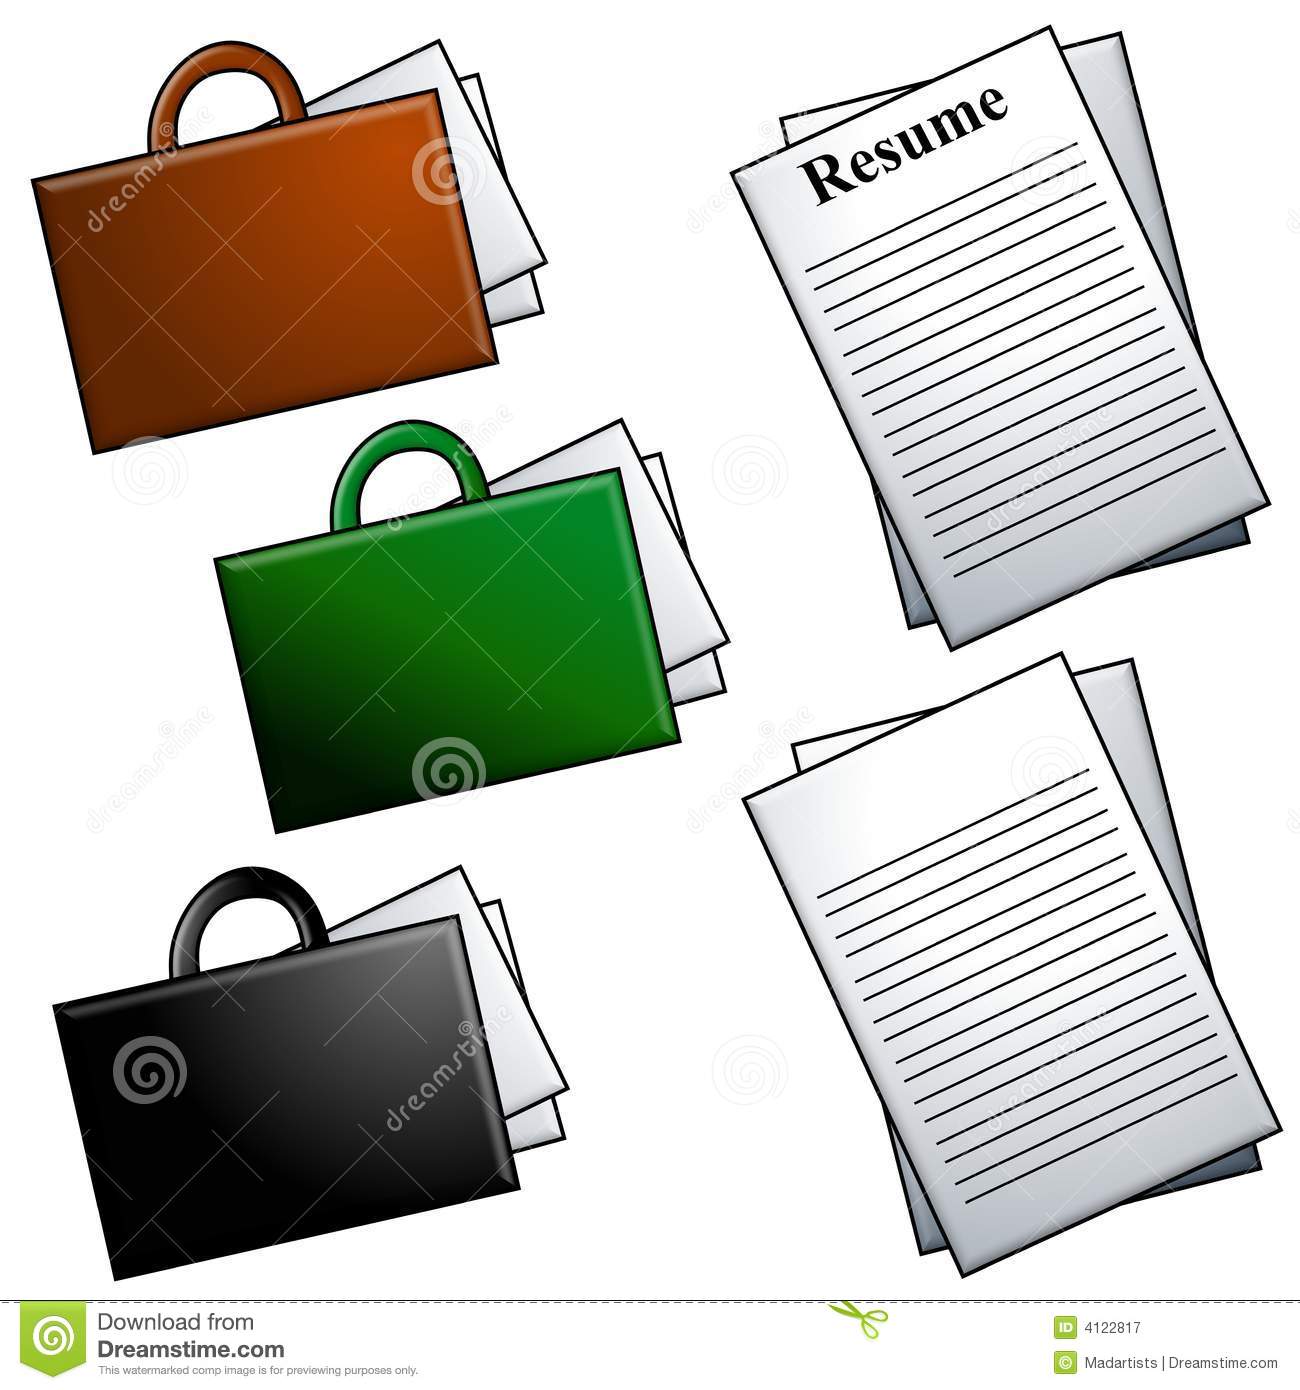 Resume Clipart Briefcases And Resume Clip Art Royalty Free Stock    